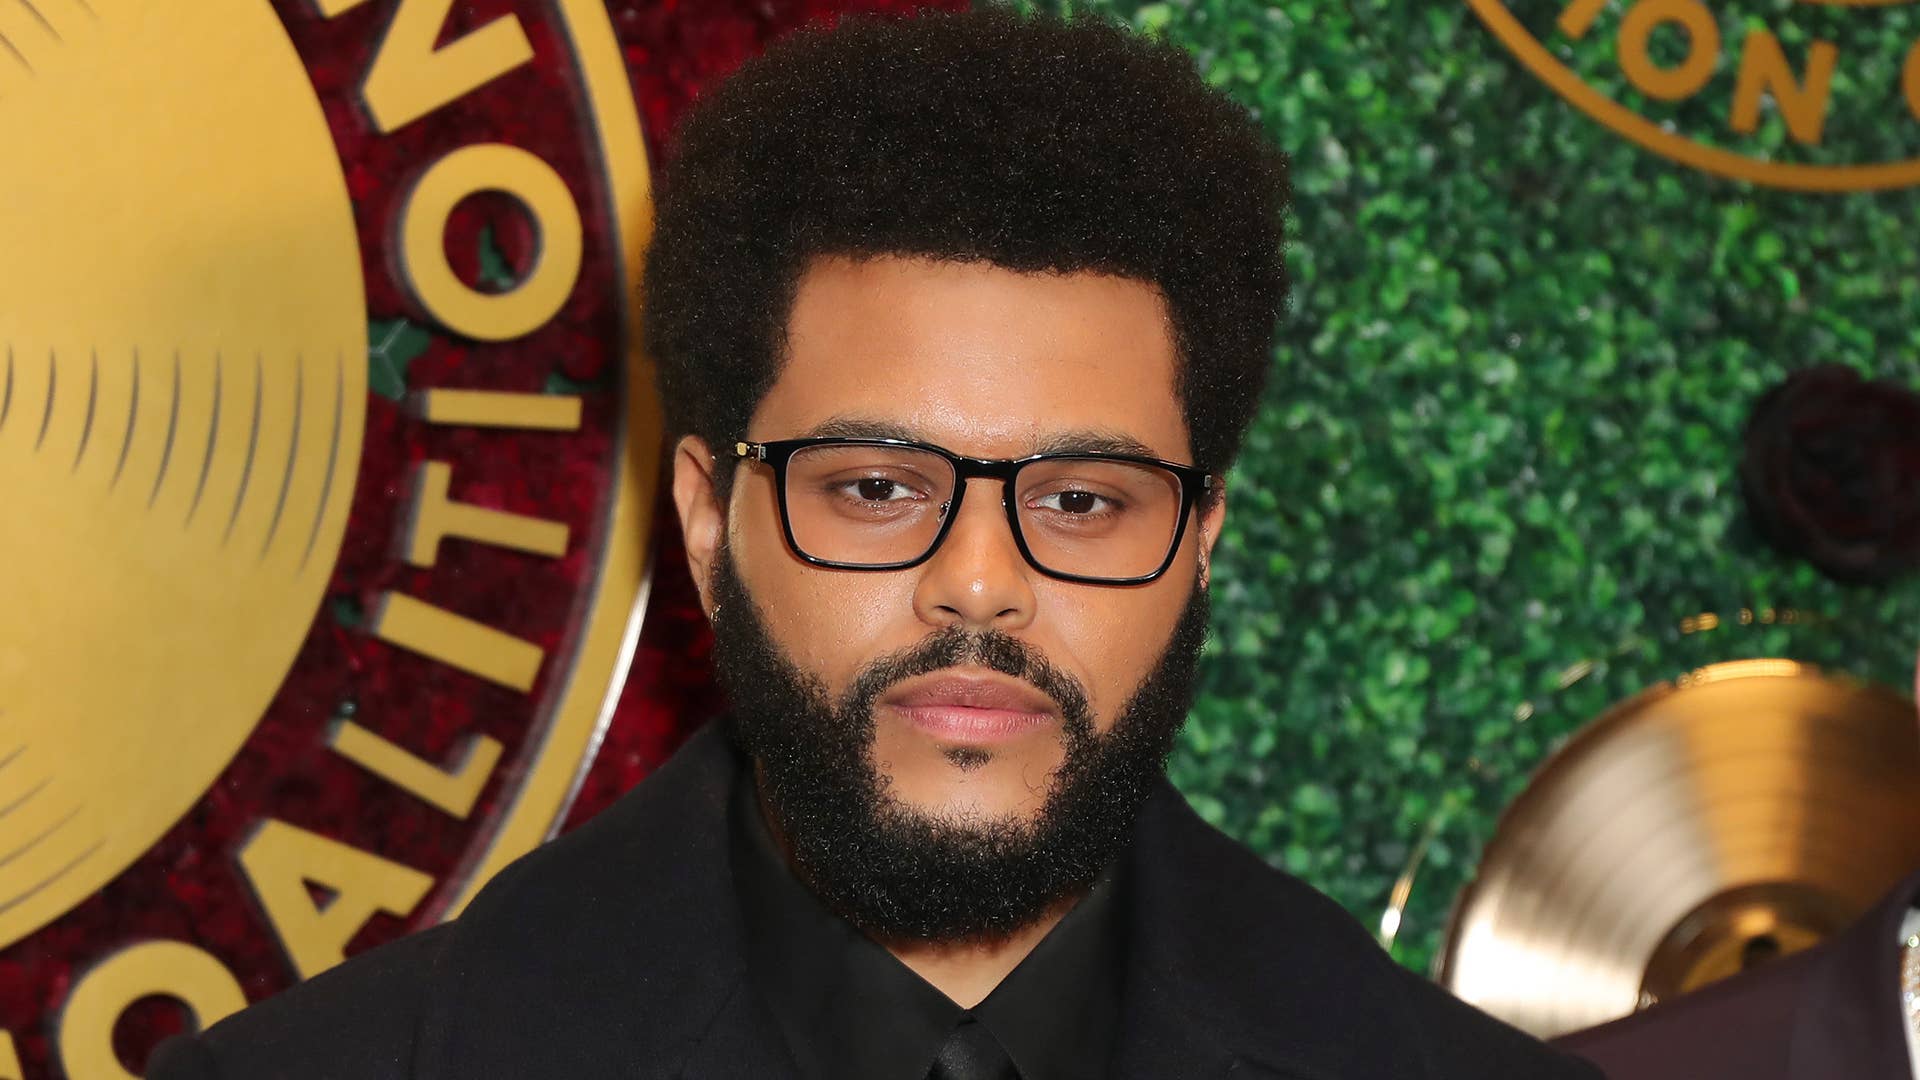 The Weeknd attends the Music In Action Awards Ceremony hosted by the Black Music Action Coalition